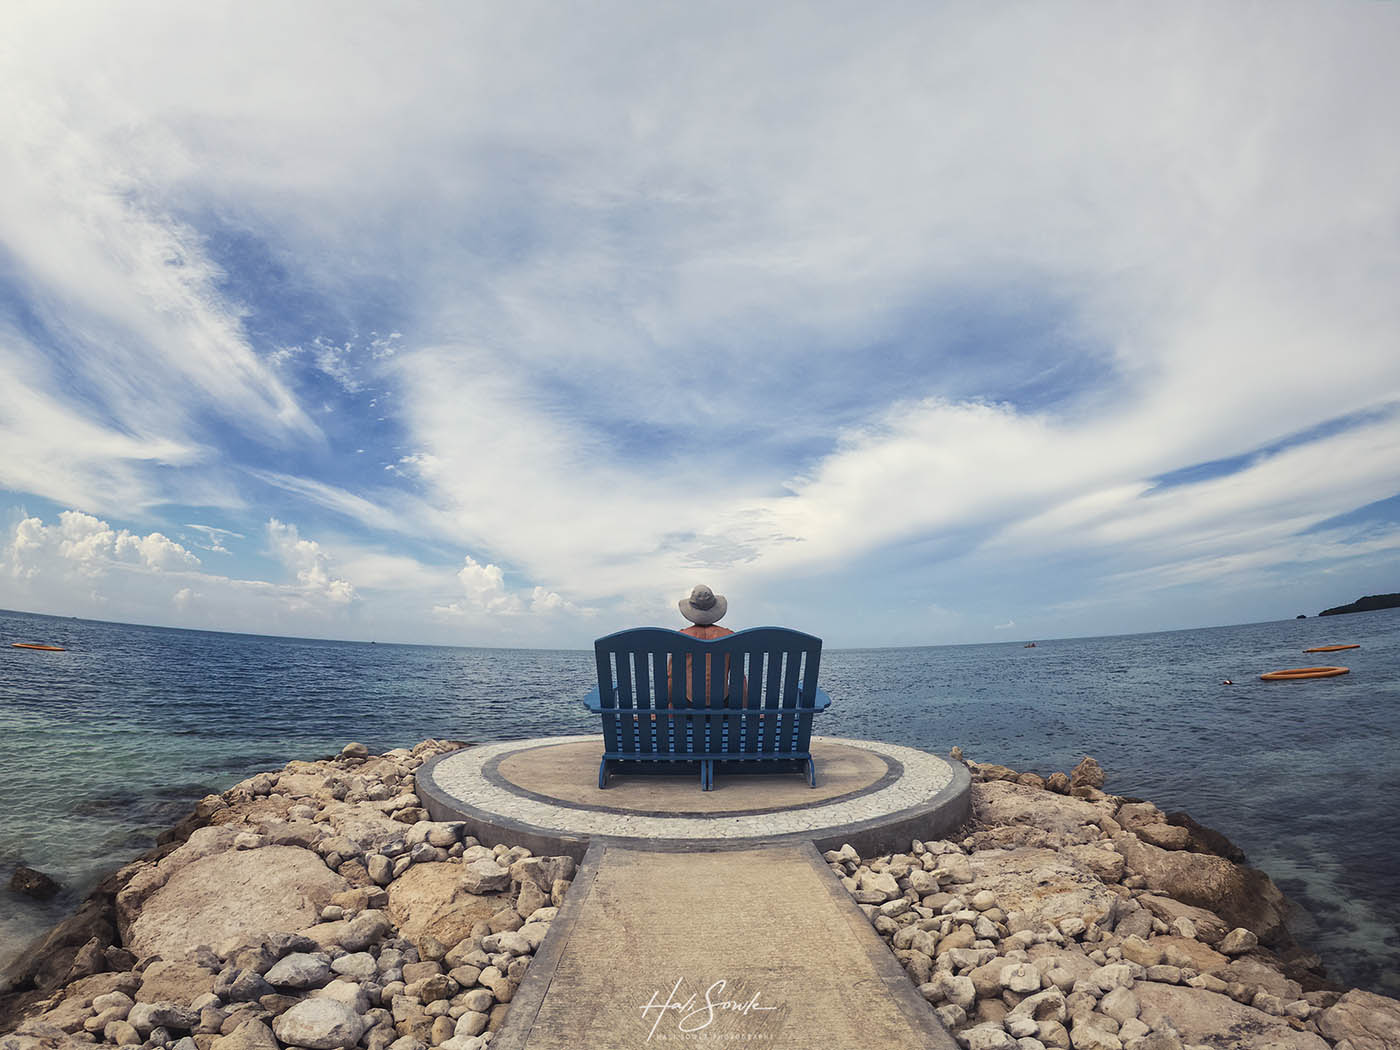 2019_09_Sandals-SouthCoast-10399-Edit1000.jpg - Mike enjoying a moments rest during one of our walks up and down the beach.  GoPro Hero 7.